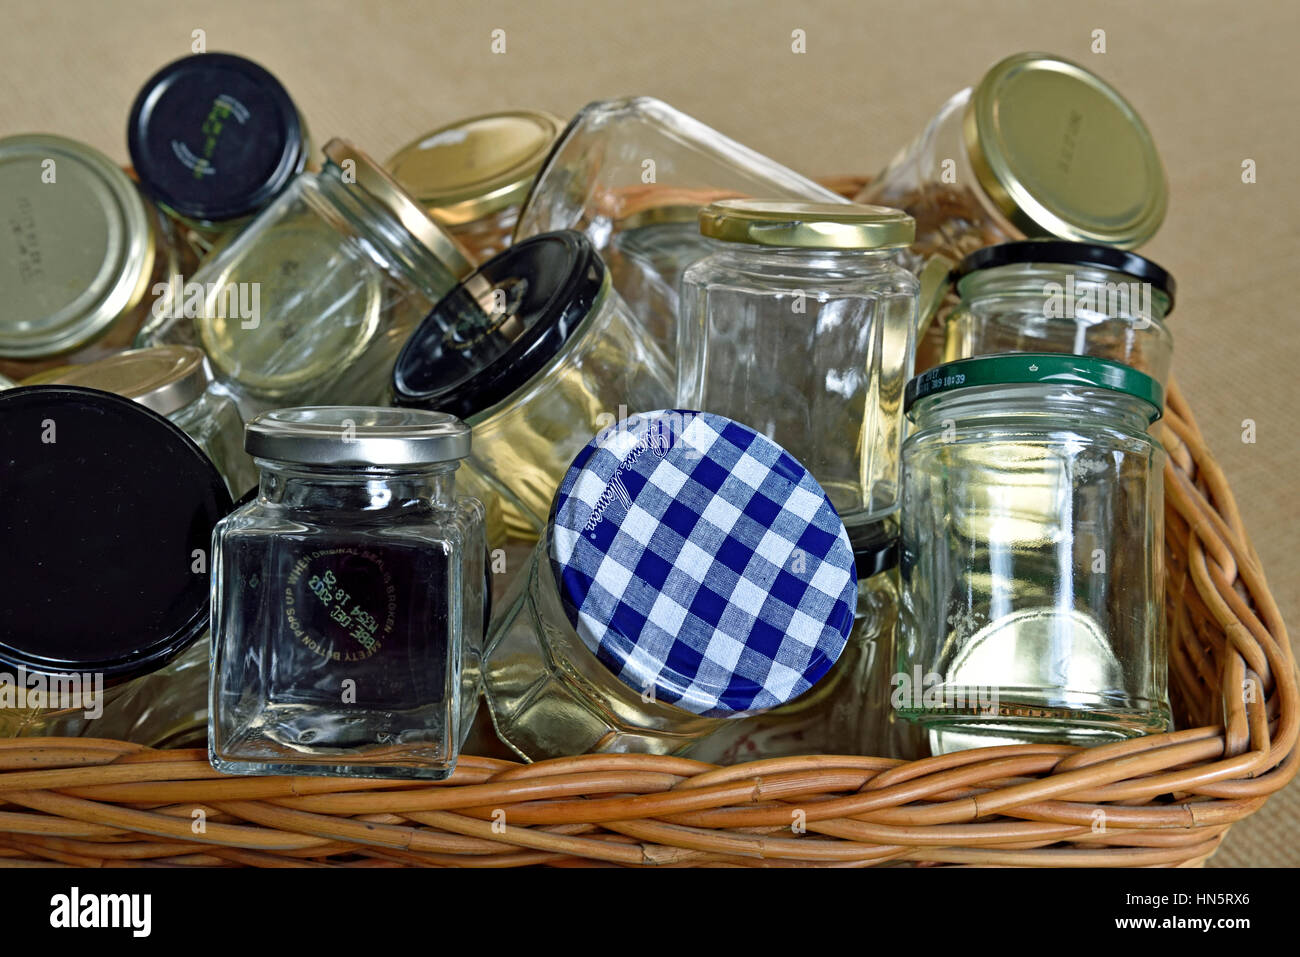 Empty glass jars with lids in basket washed and ready for reuse, storage or recycling. Stock Photo